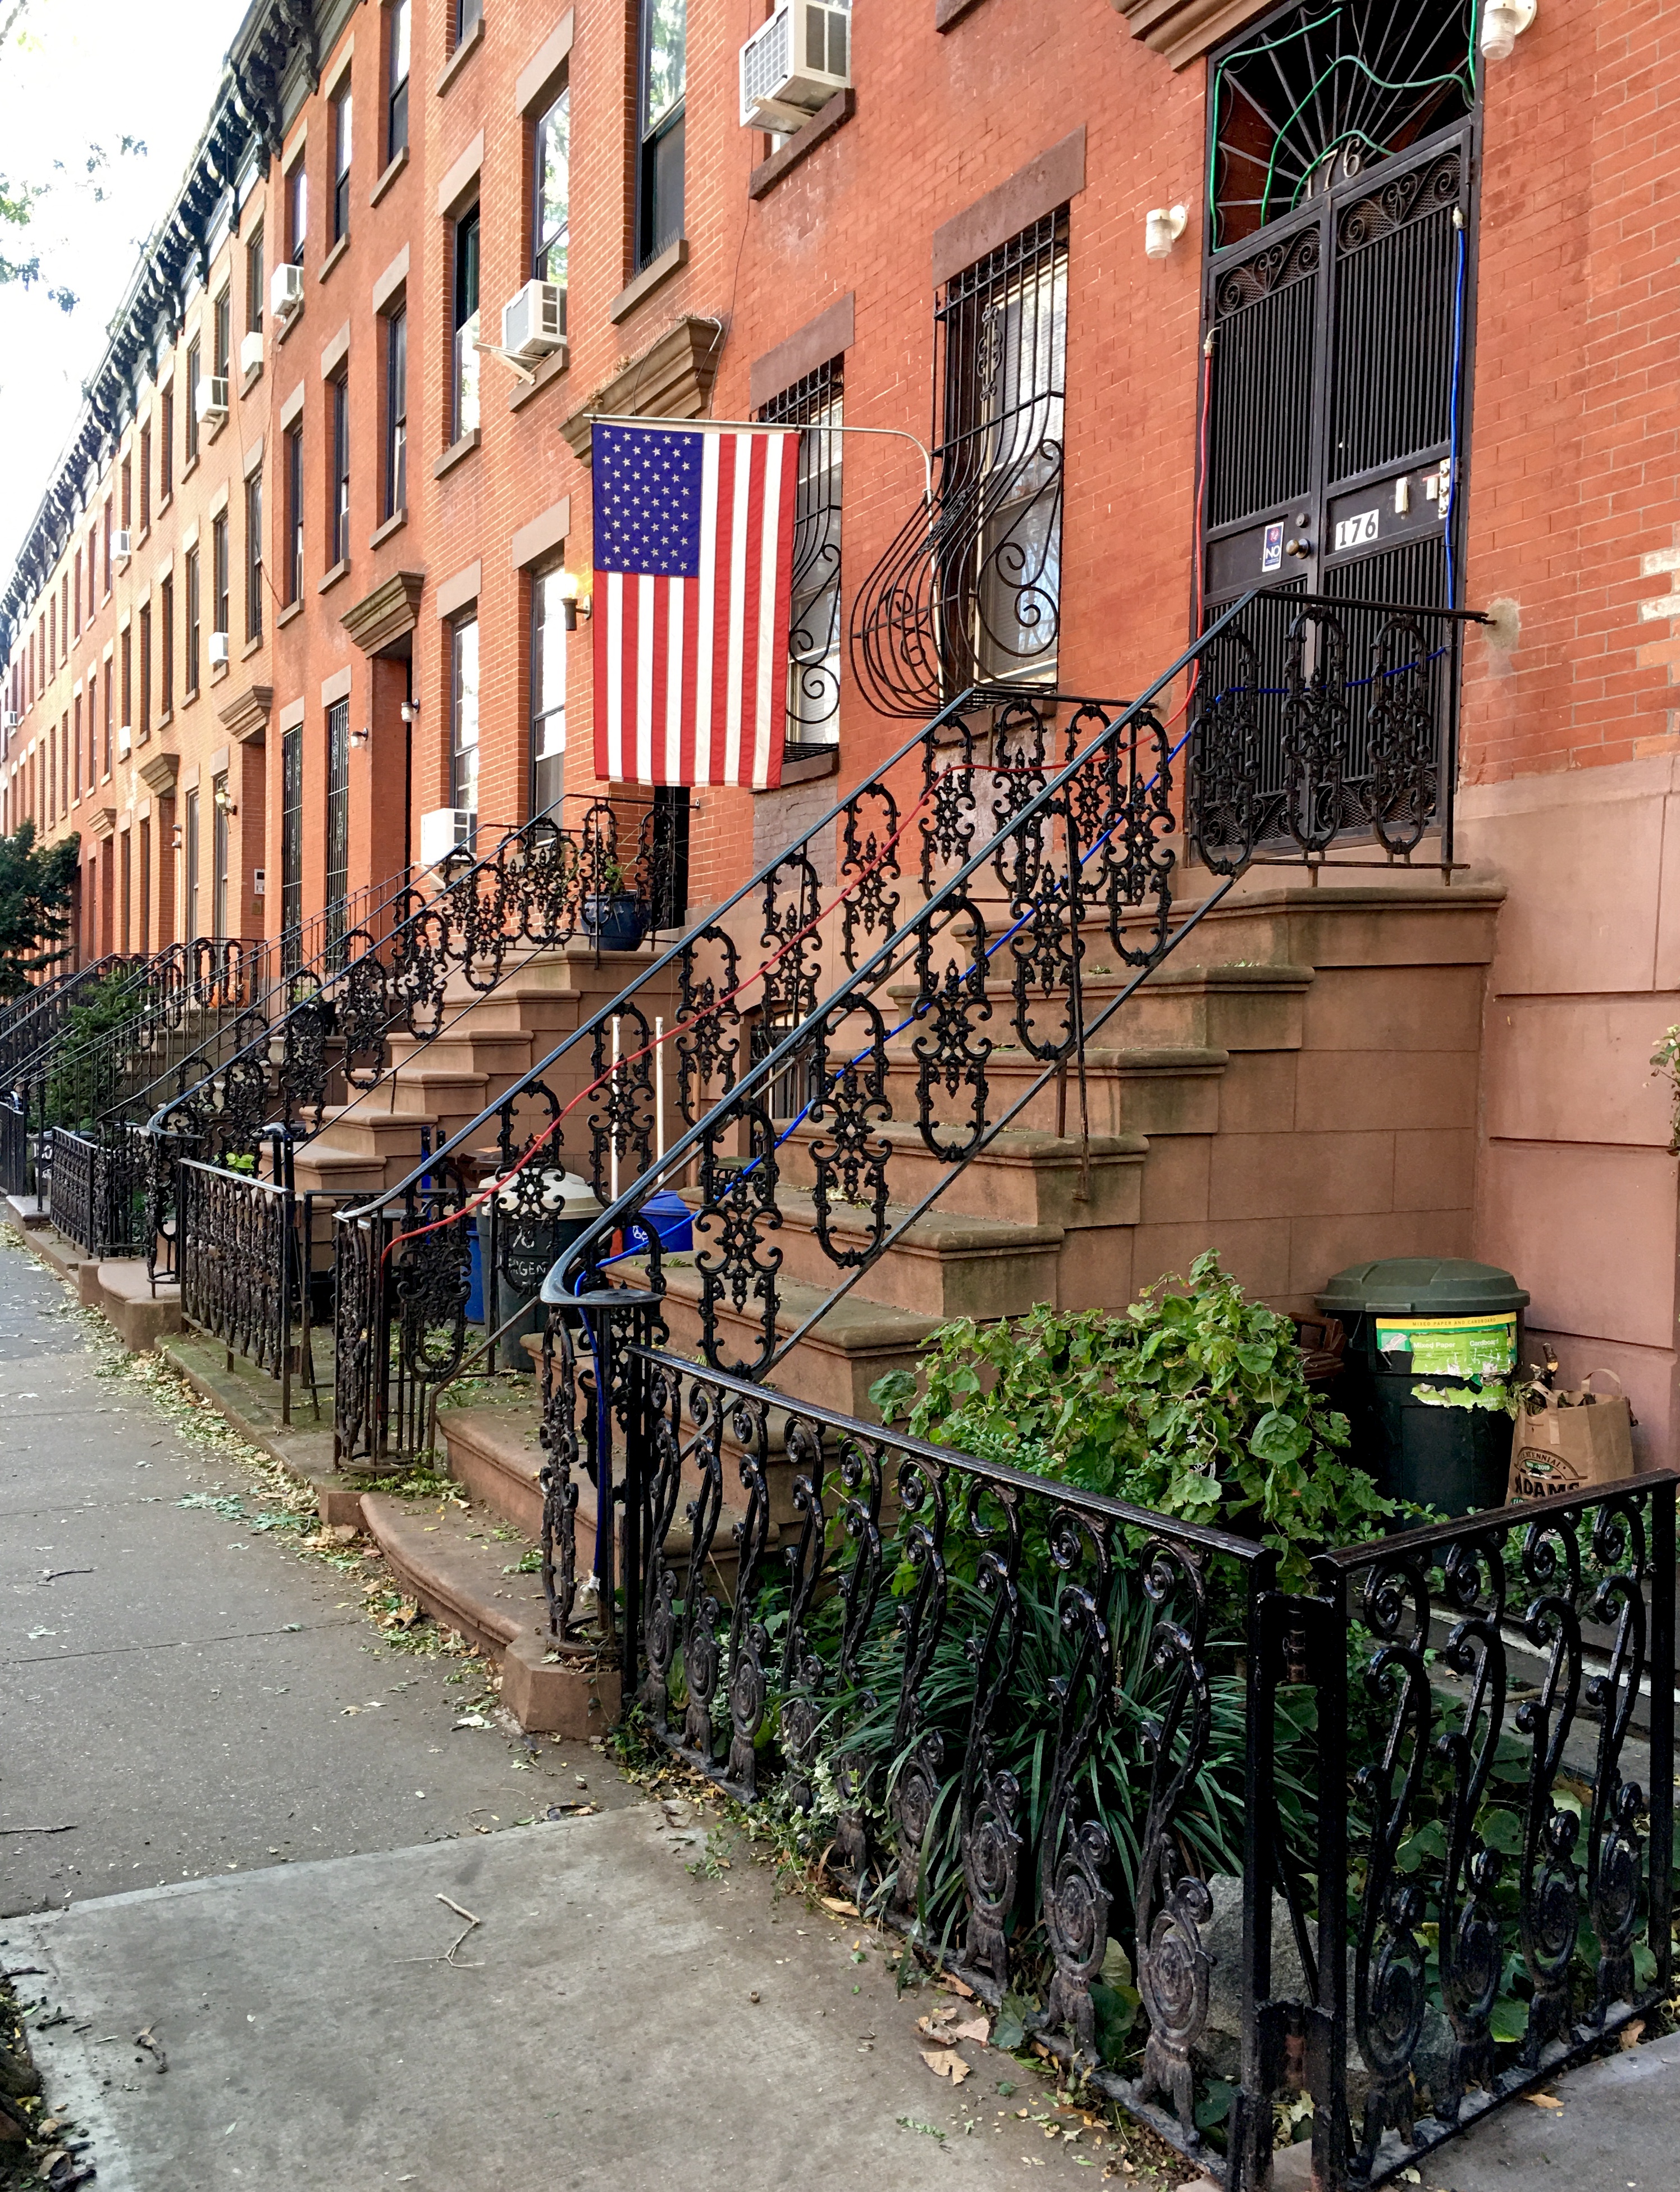 Long may it wave — in the Boerum Hill Historic District. Eagle photo by Lore Croghan